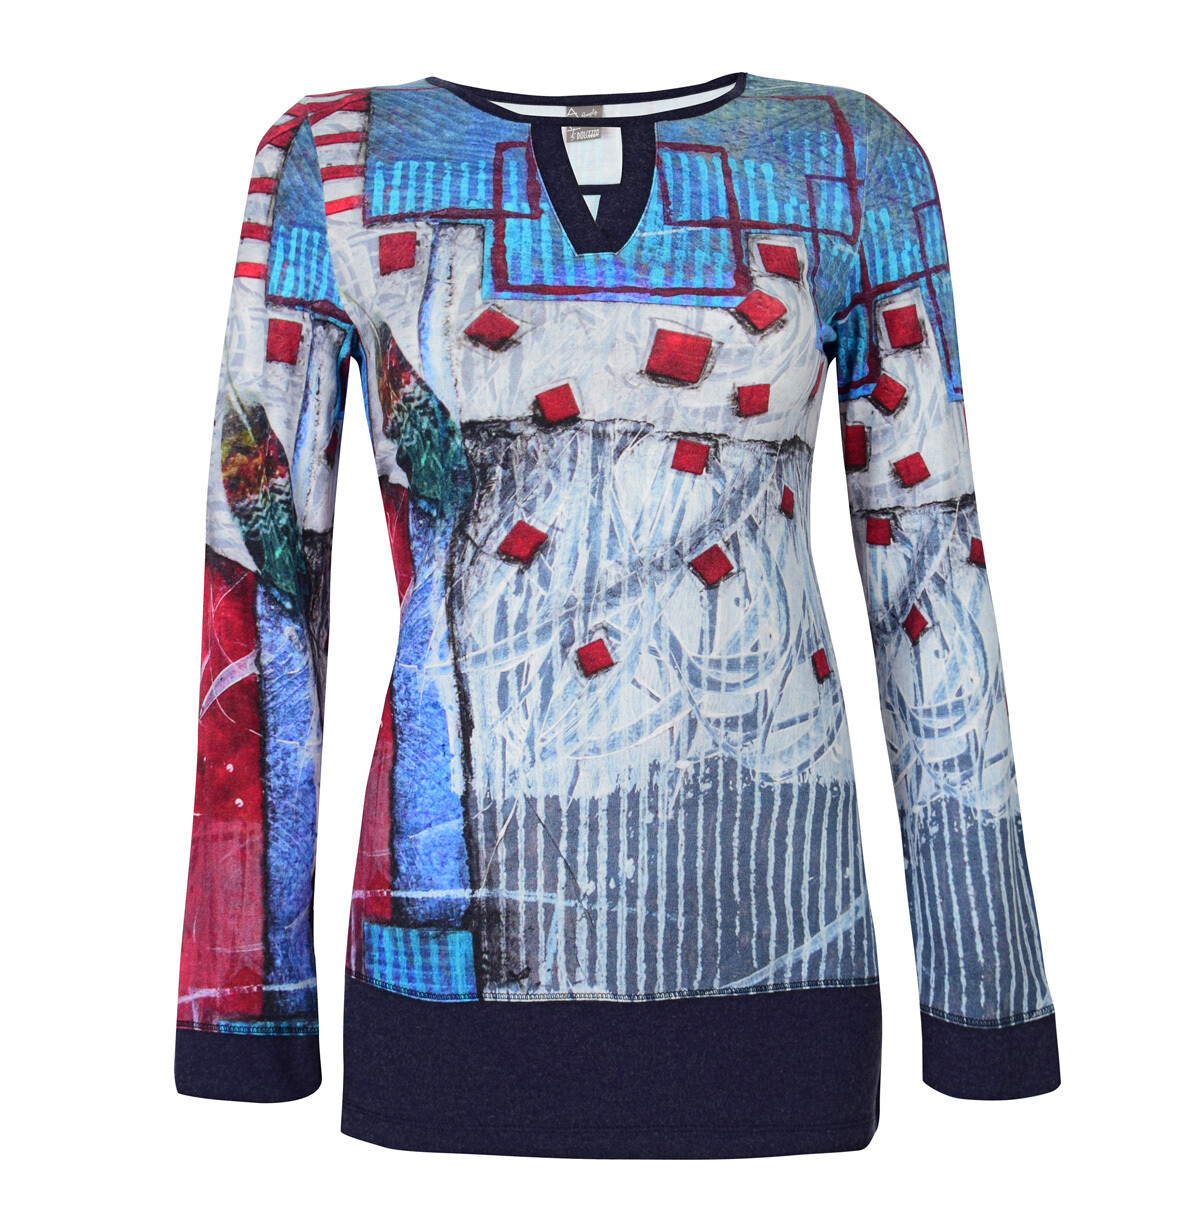 Simply Art Dolcezza: Only Love Spiritually Square Abstract Art Tunic SOLD OUT